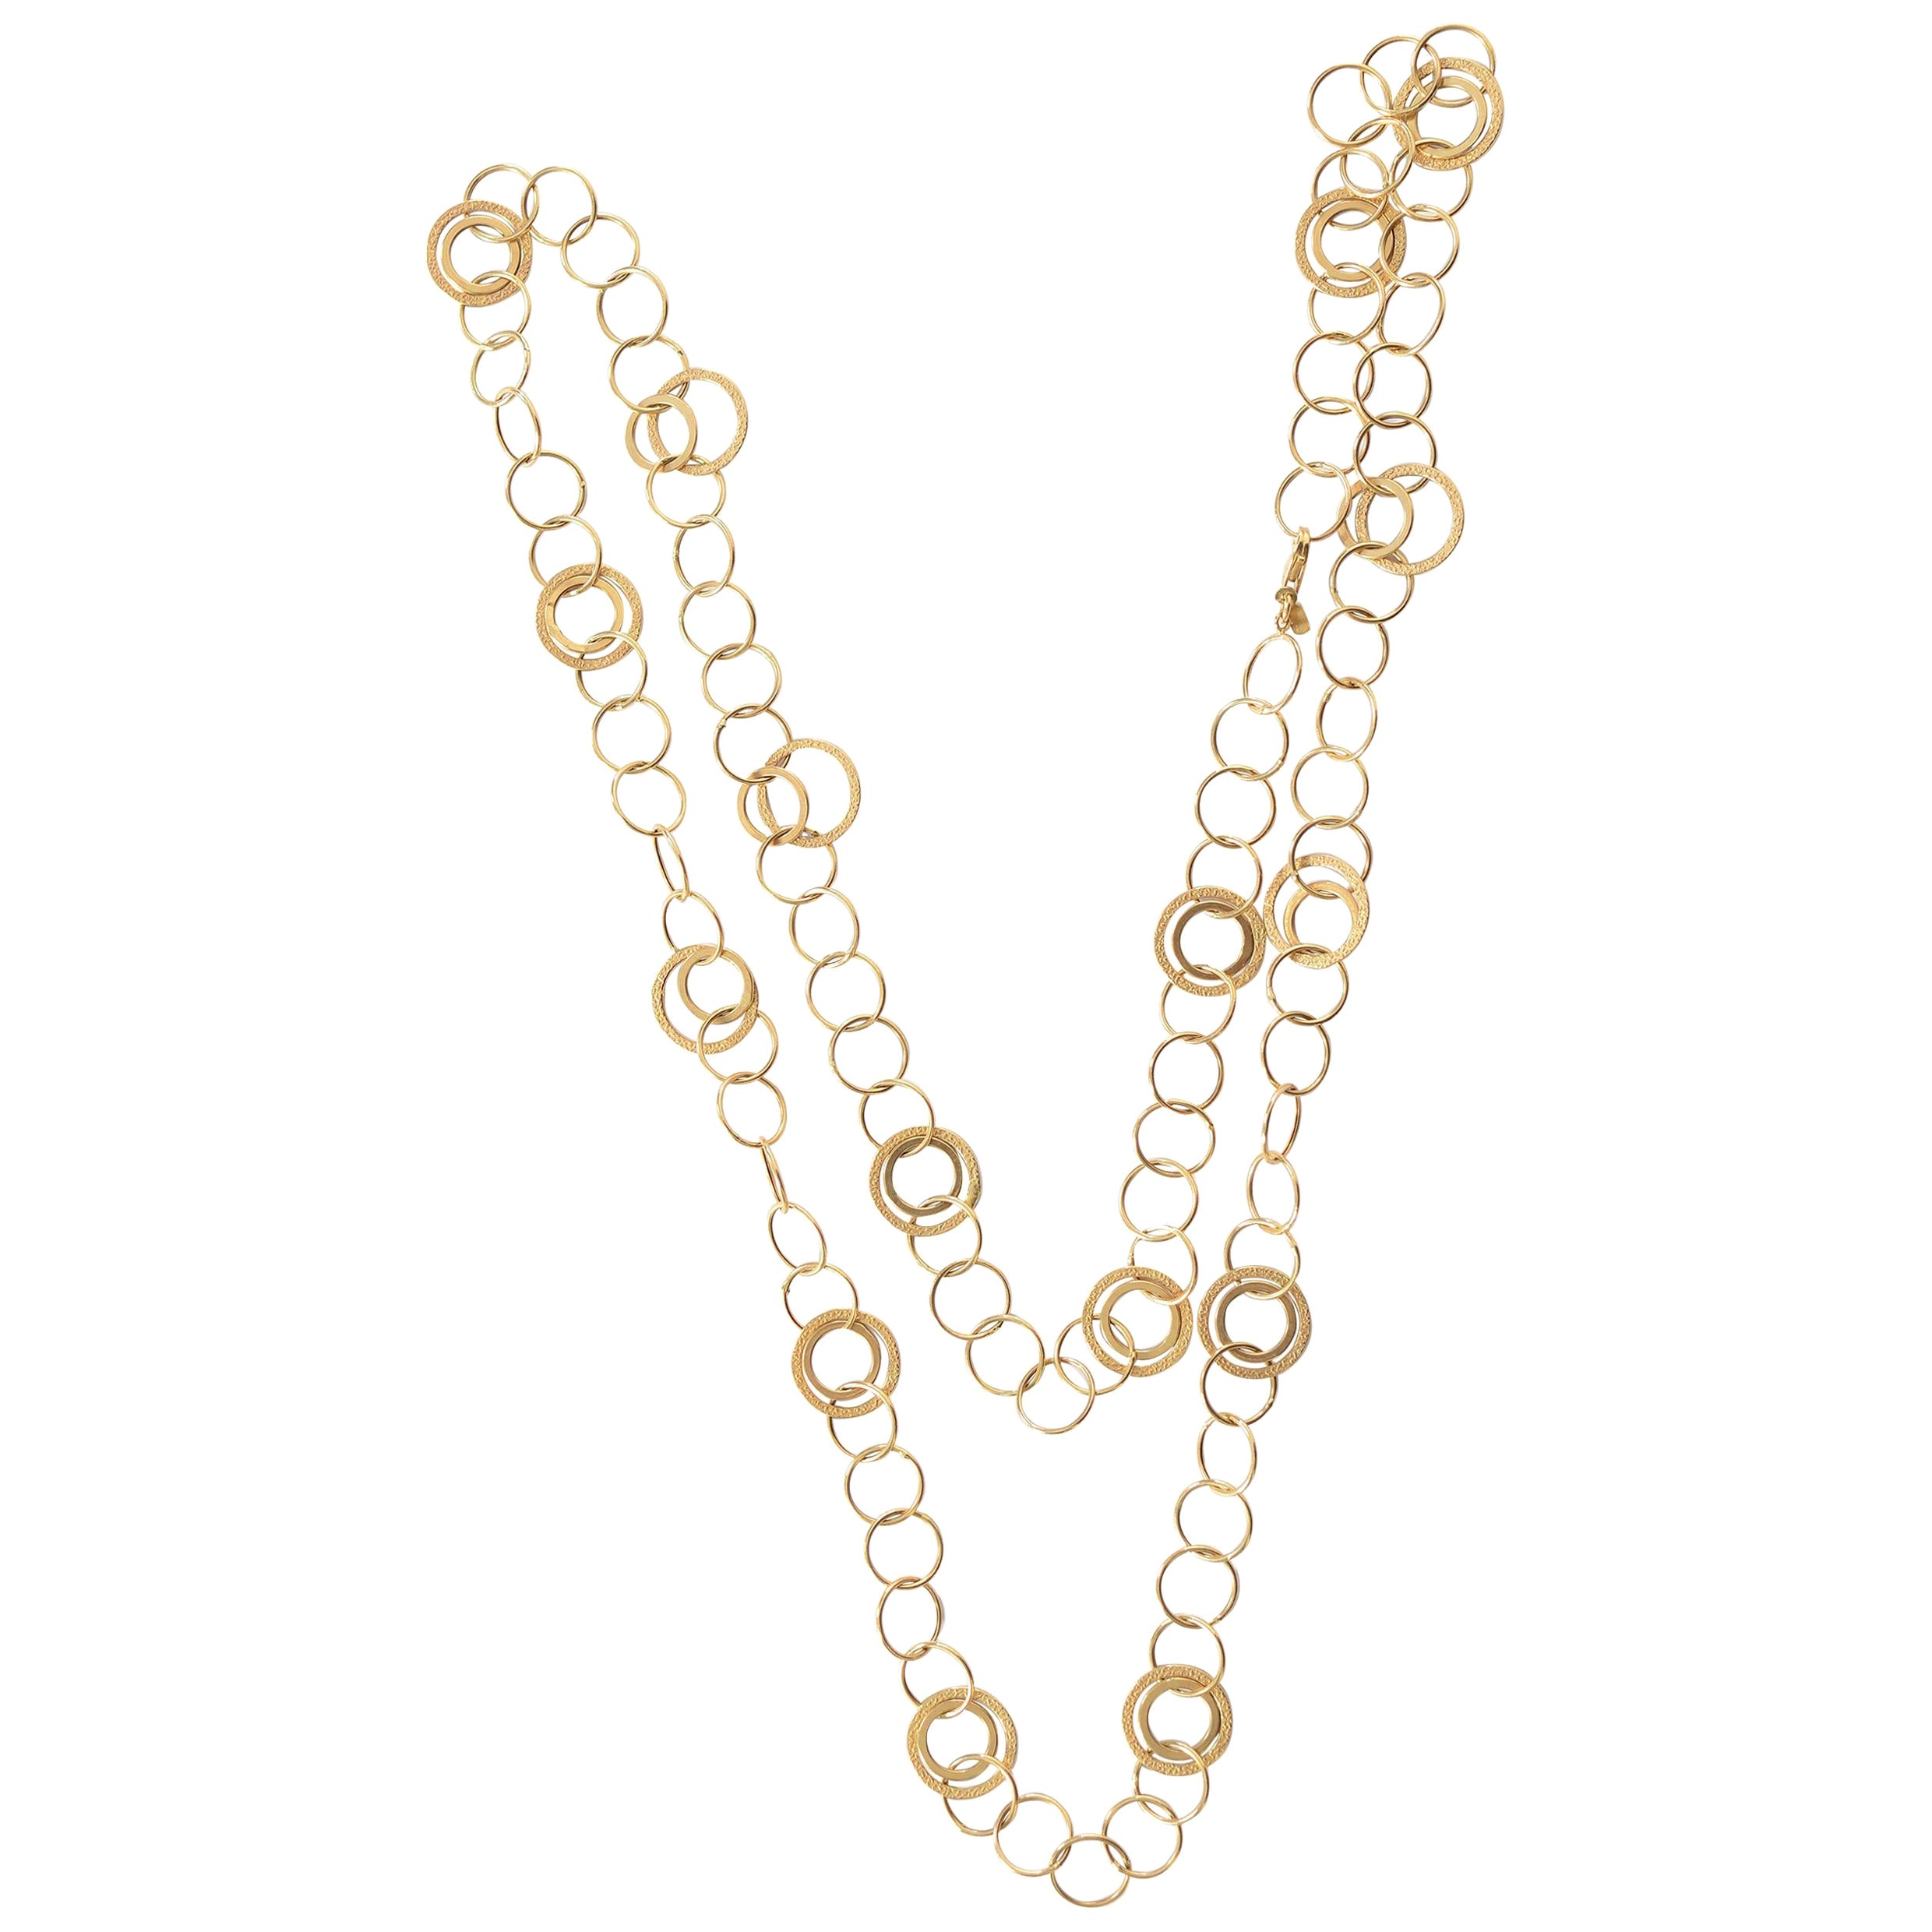 Long Gold Circles Necklace For Sale